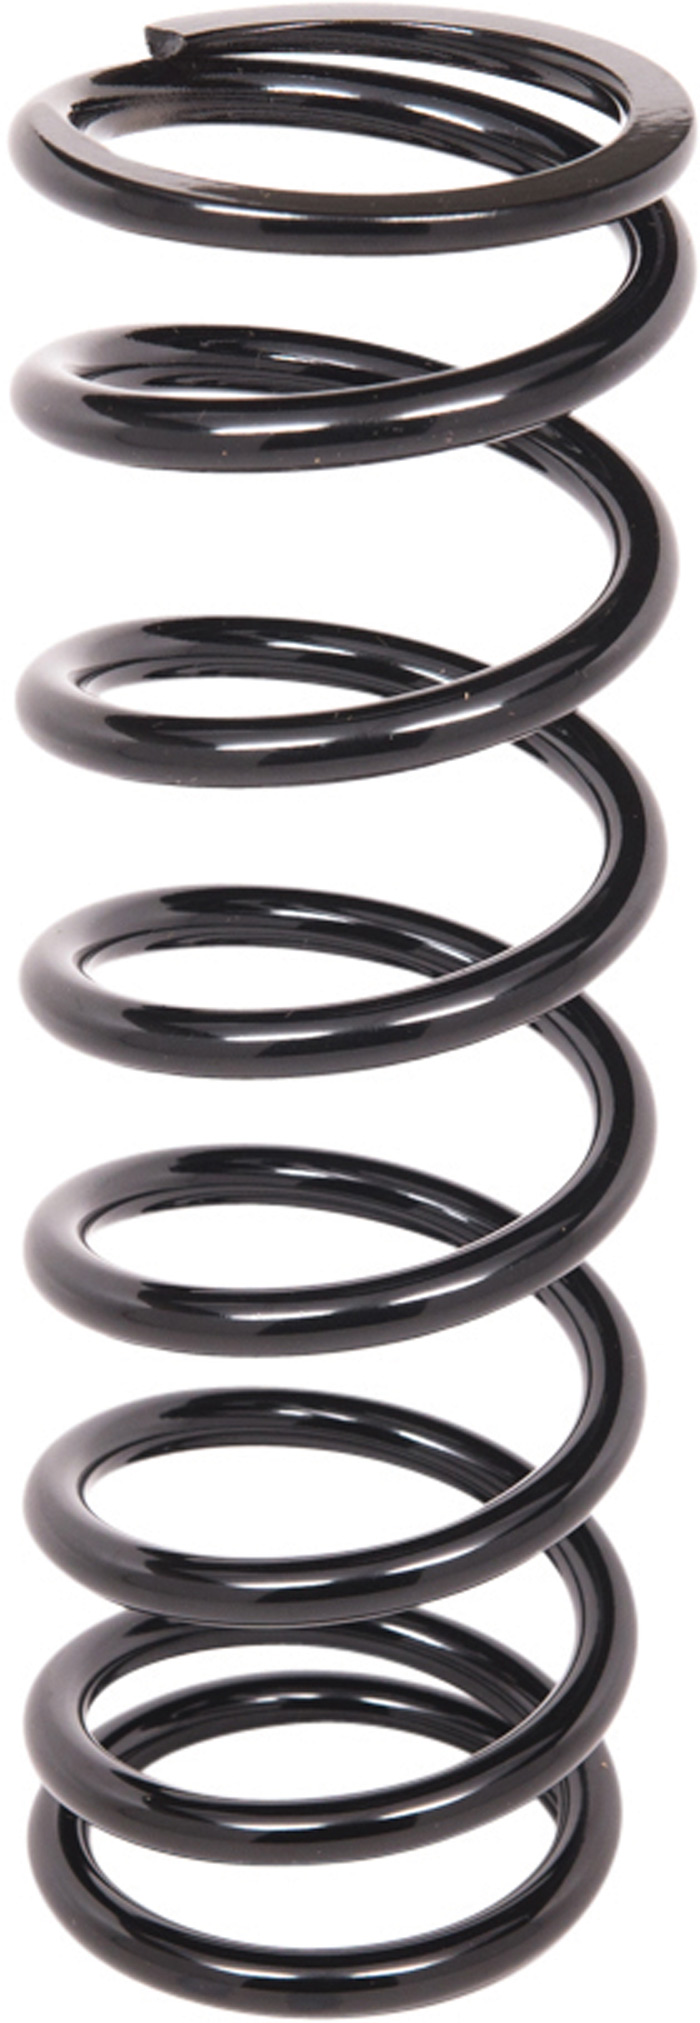 Aldan coilover springs are available in long-lasting black powdercoat or a polished hard chrome finish.